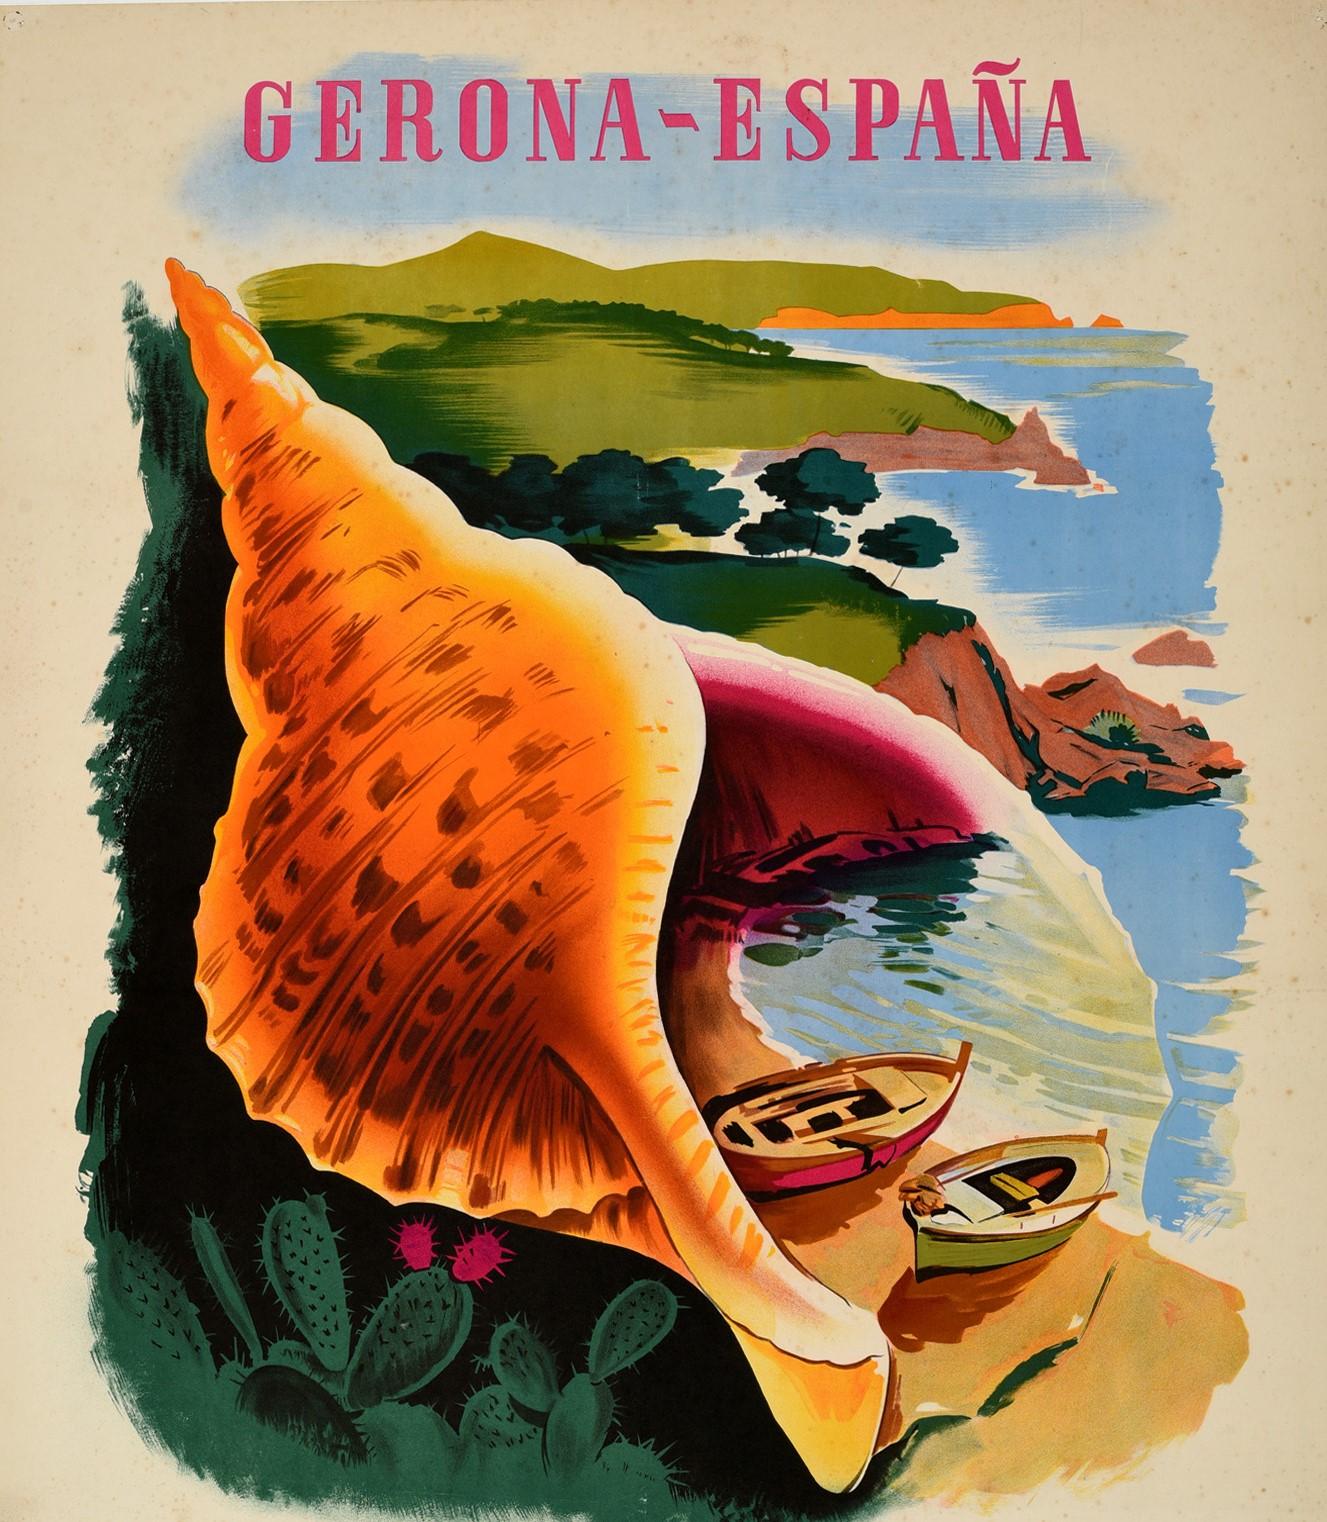 Original vintage travel poster for Girona Spain Costa Brava The Wonder of the Mediterranean / Gerona Espana La Maravilla del Mediterraneo featuring a great design depicting a sea shell with two wooden boats on a sandy beach with fields and trees on